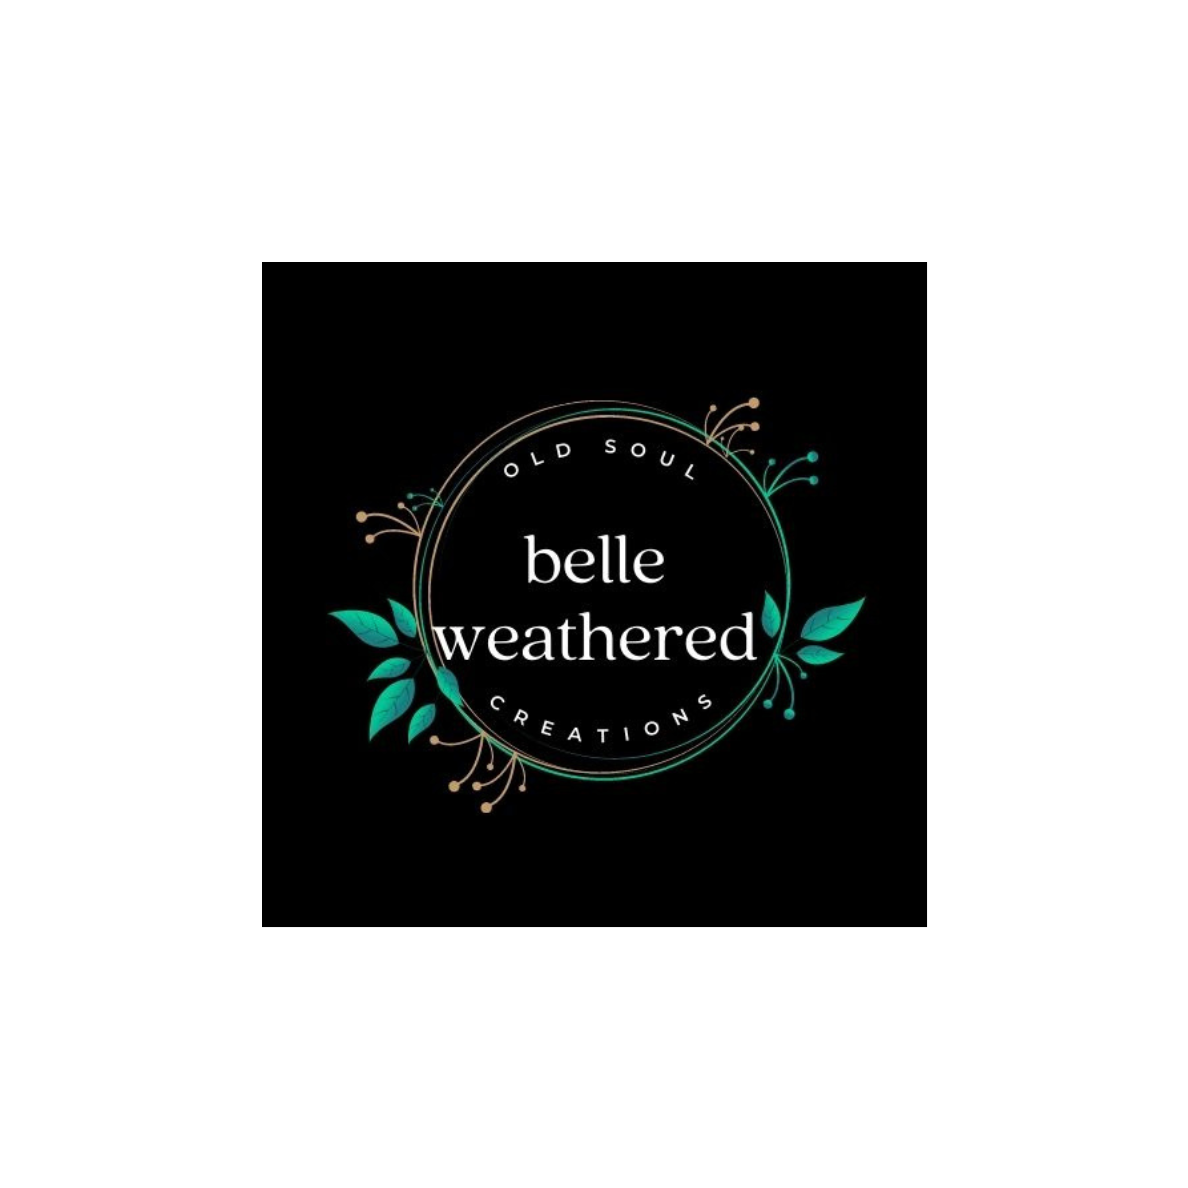  belle weathered